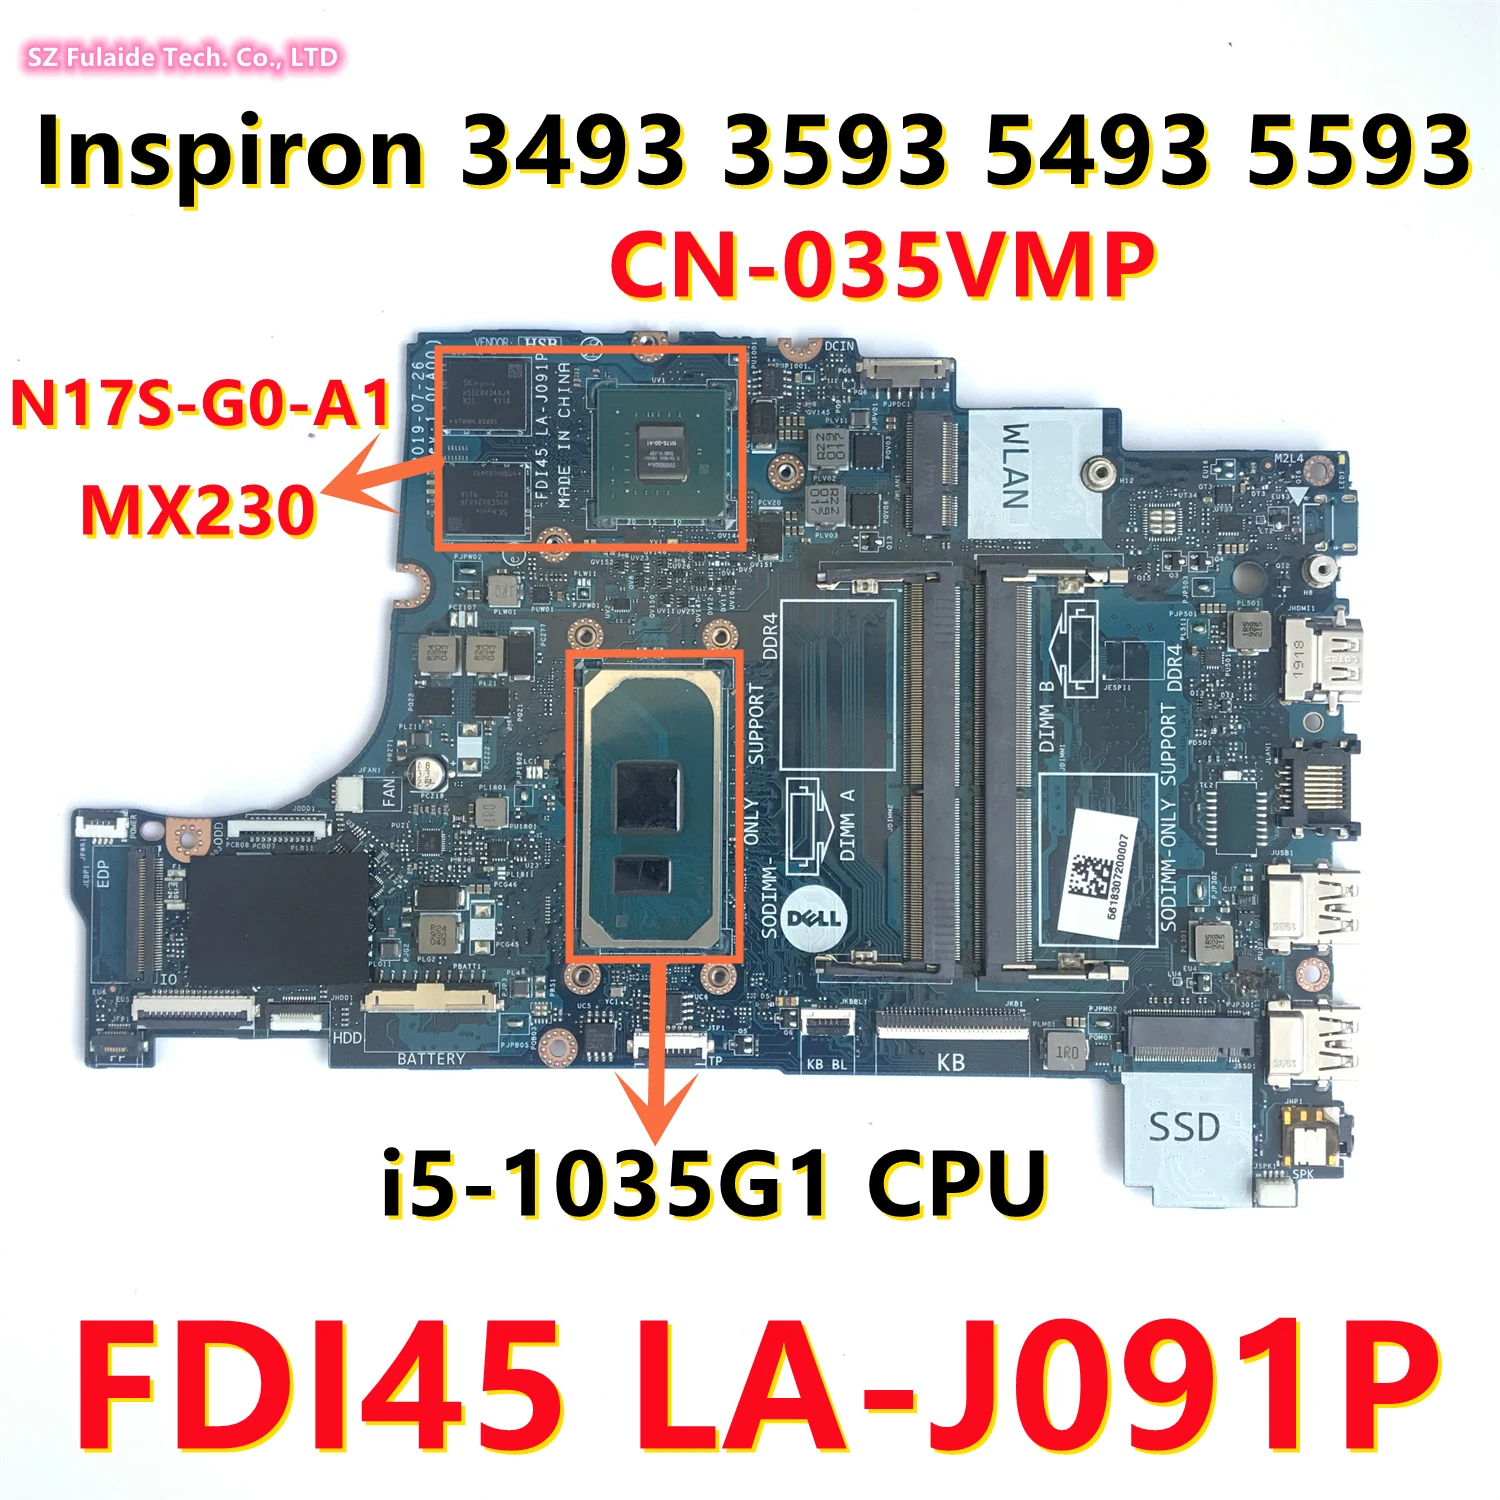 

FDI45 LA-J091P For dell Inspiron 3493 3593 5493 5593 Laptop Motherboard With i5-1035G1 CPU N17S-G0-A1 MX230 CN-035VMP 35VMP